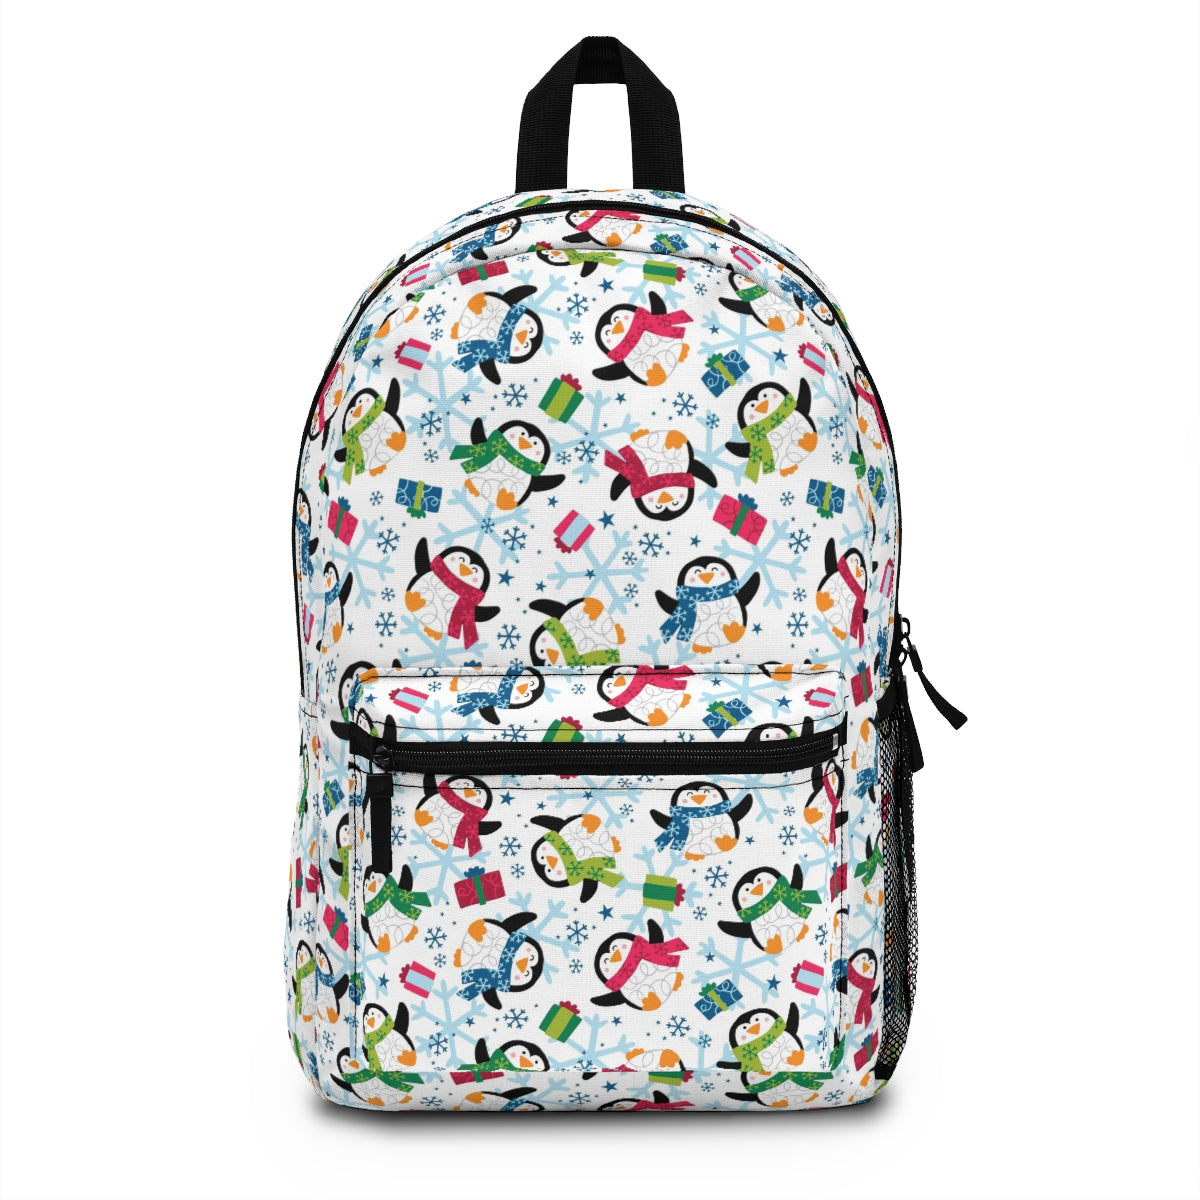 Penguins and Snowflakes Backpack